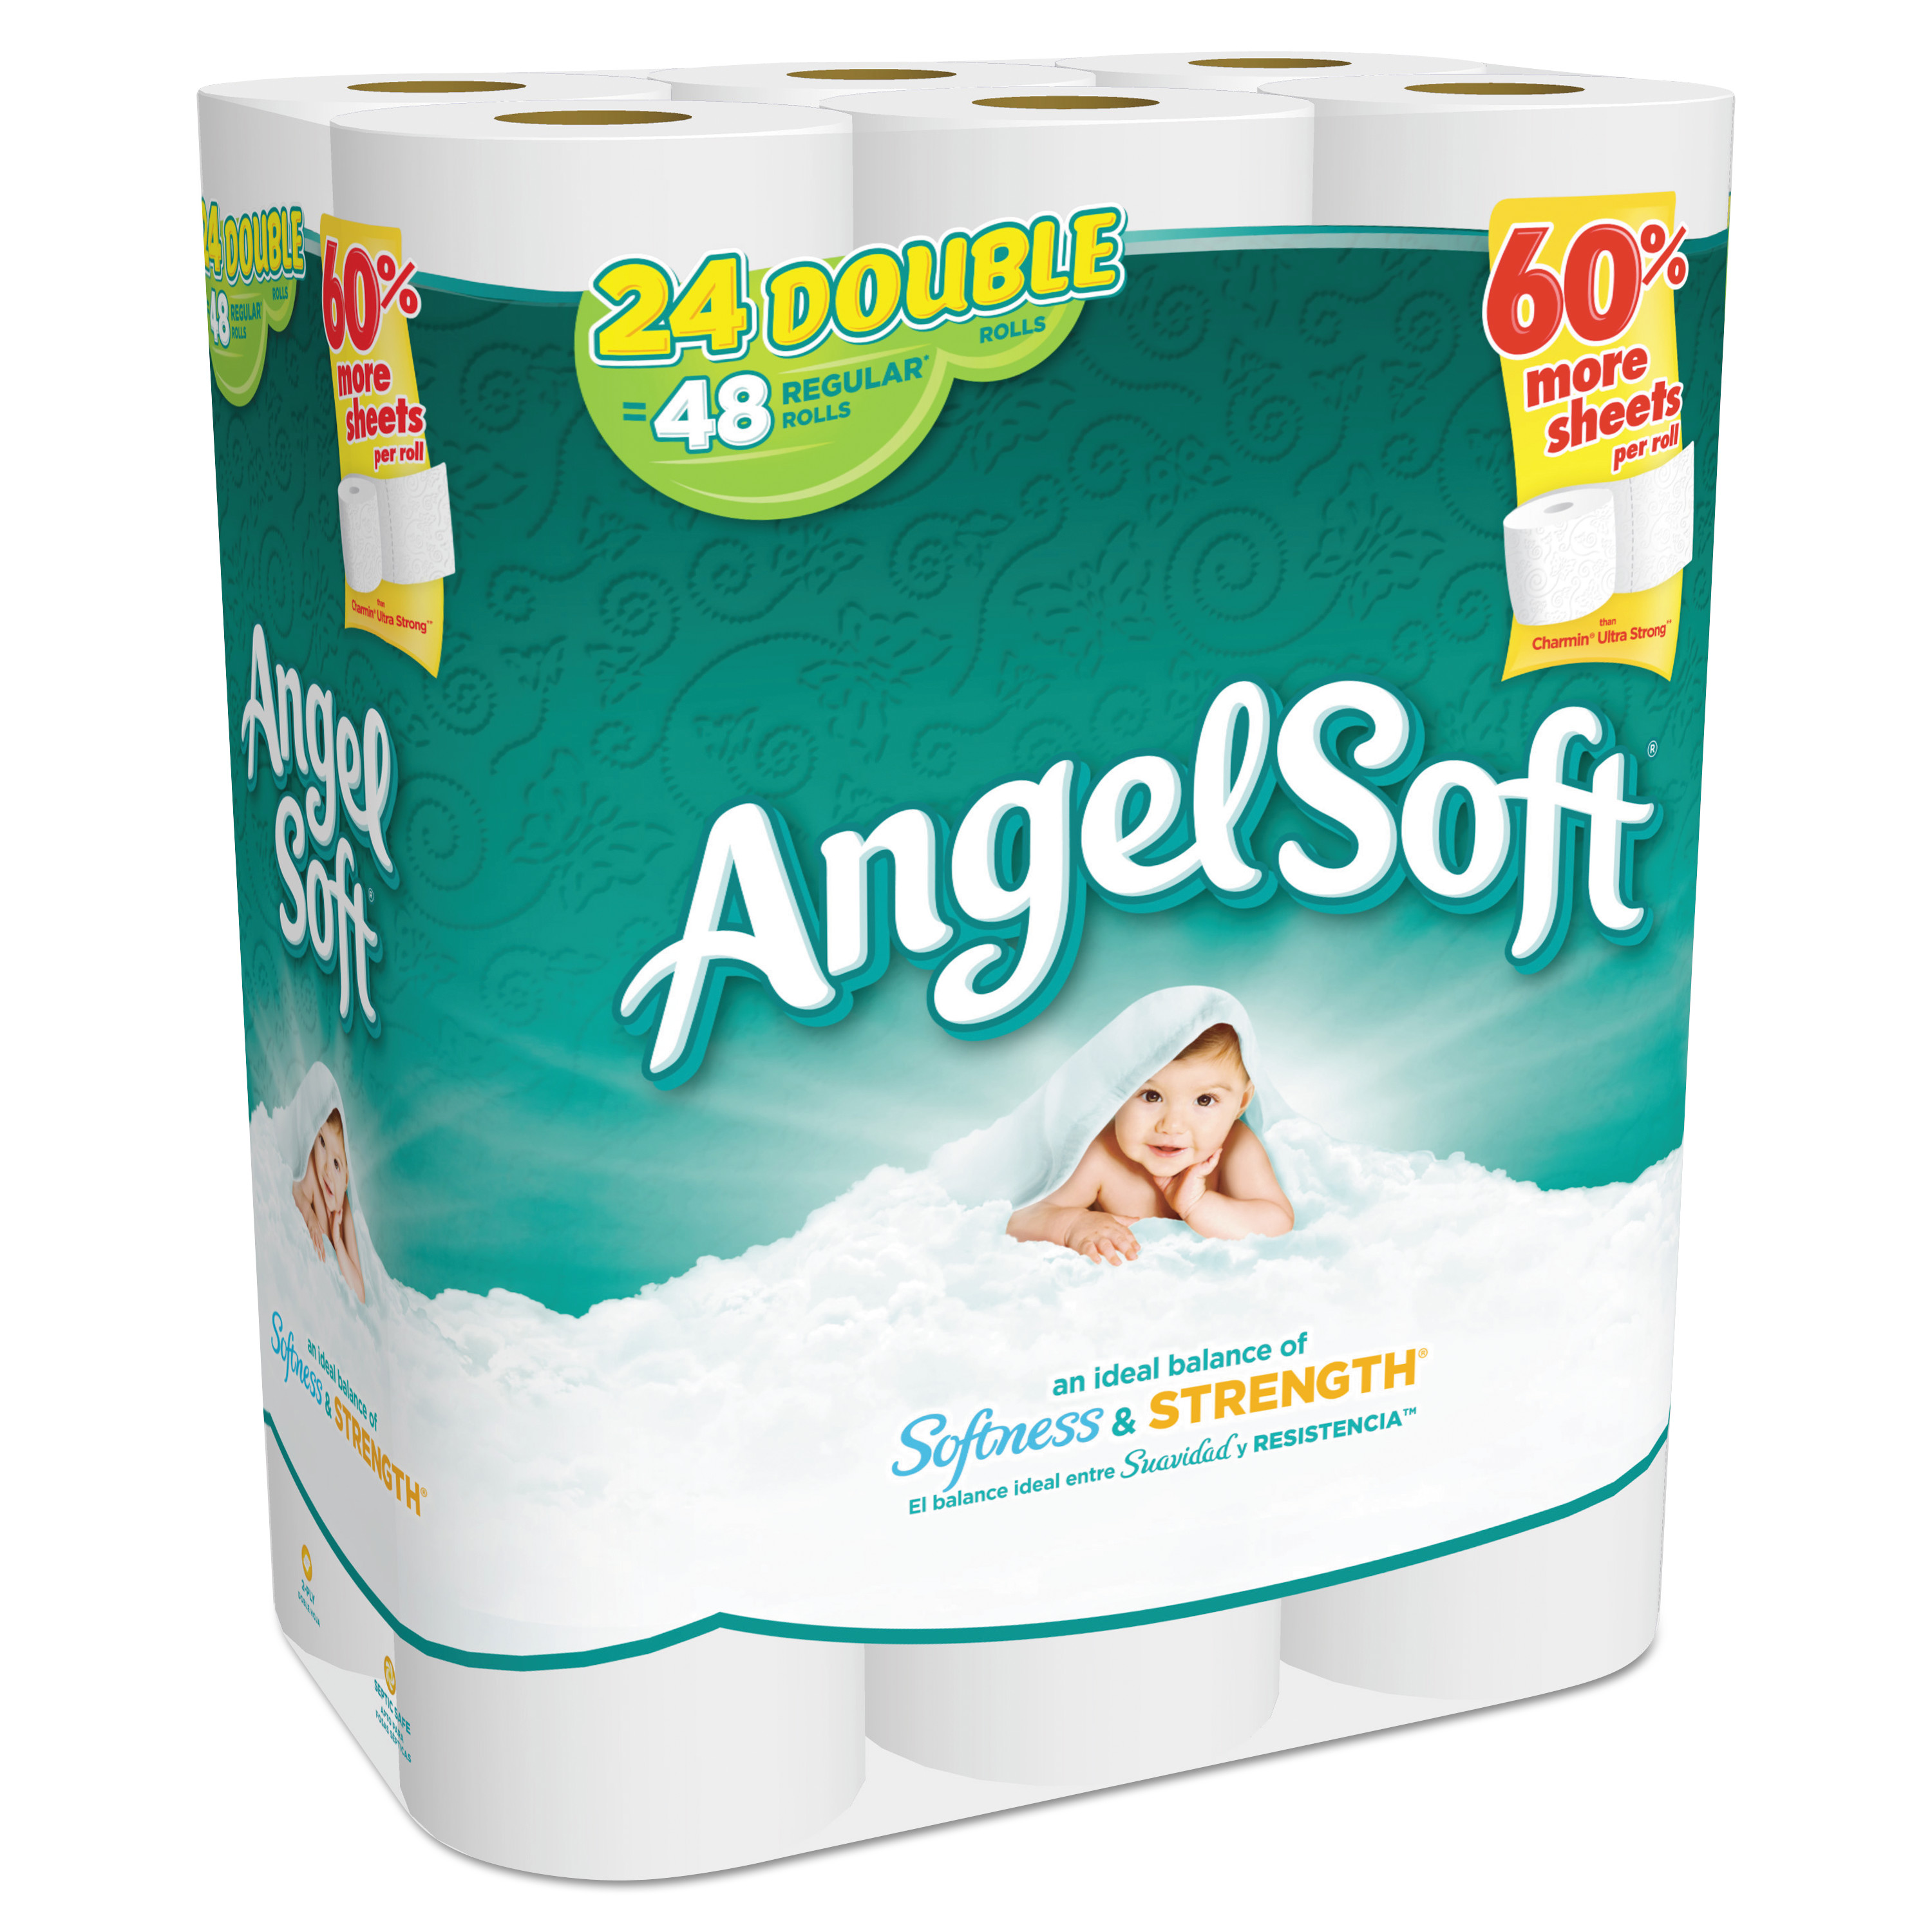 Double-Roll Bathroom Tissue, 2-Ply, White, 264 Sheets/Roll, 24/Pk, 2 Pks/Ct